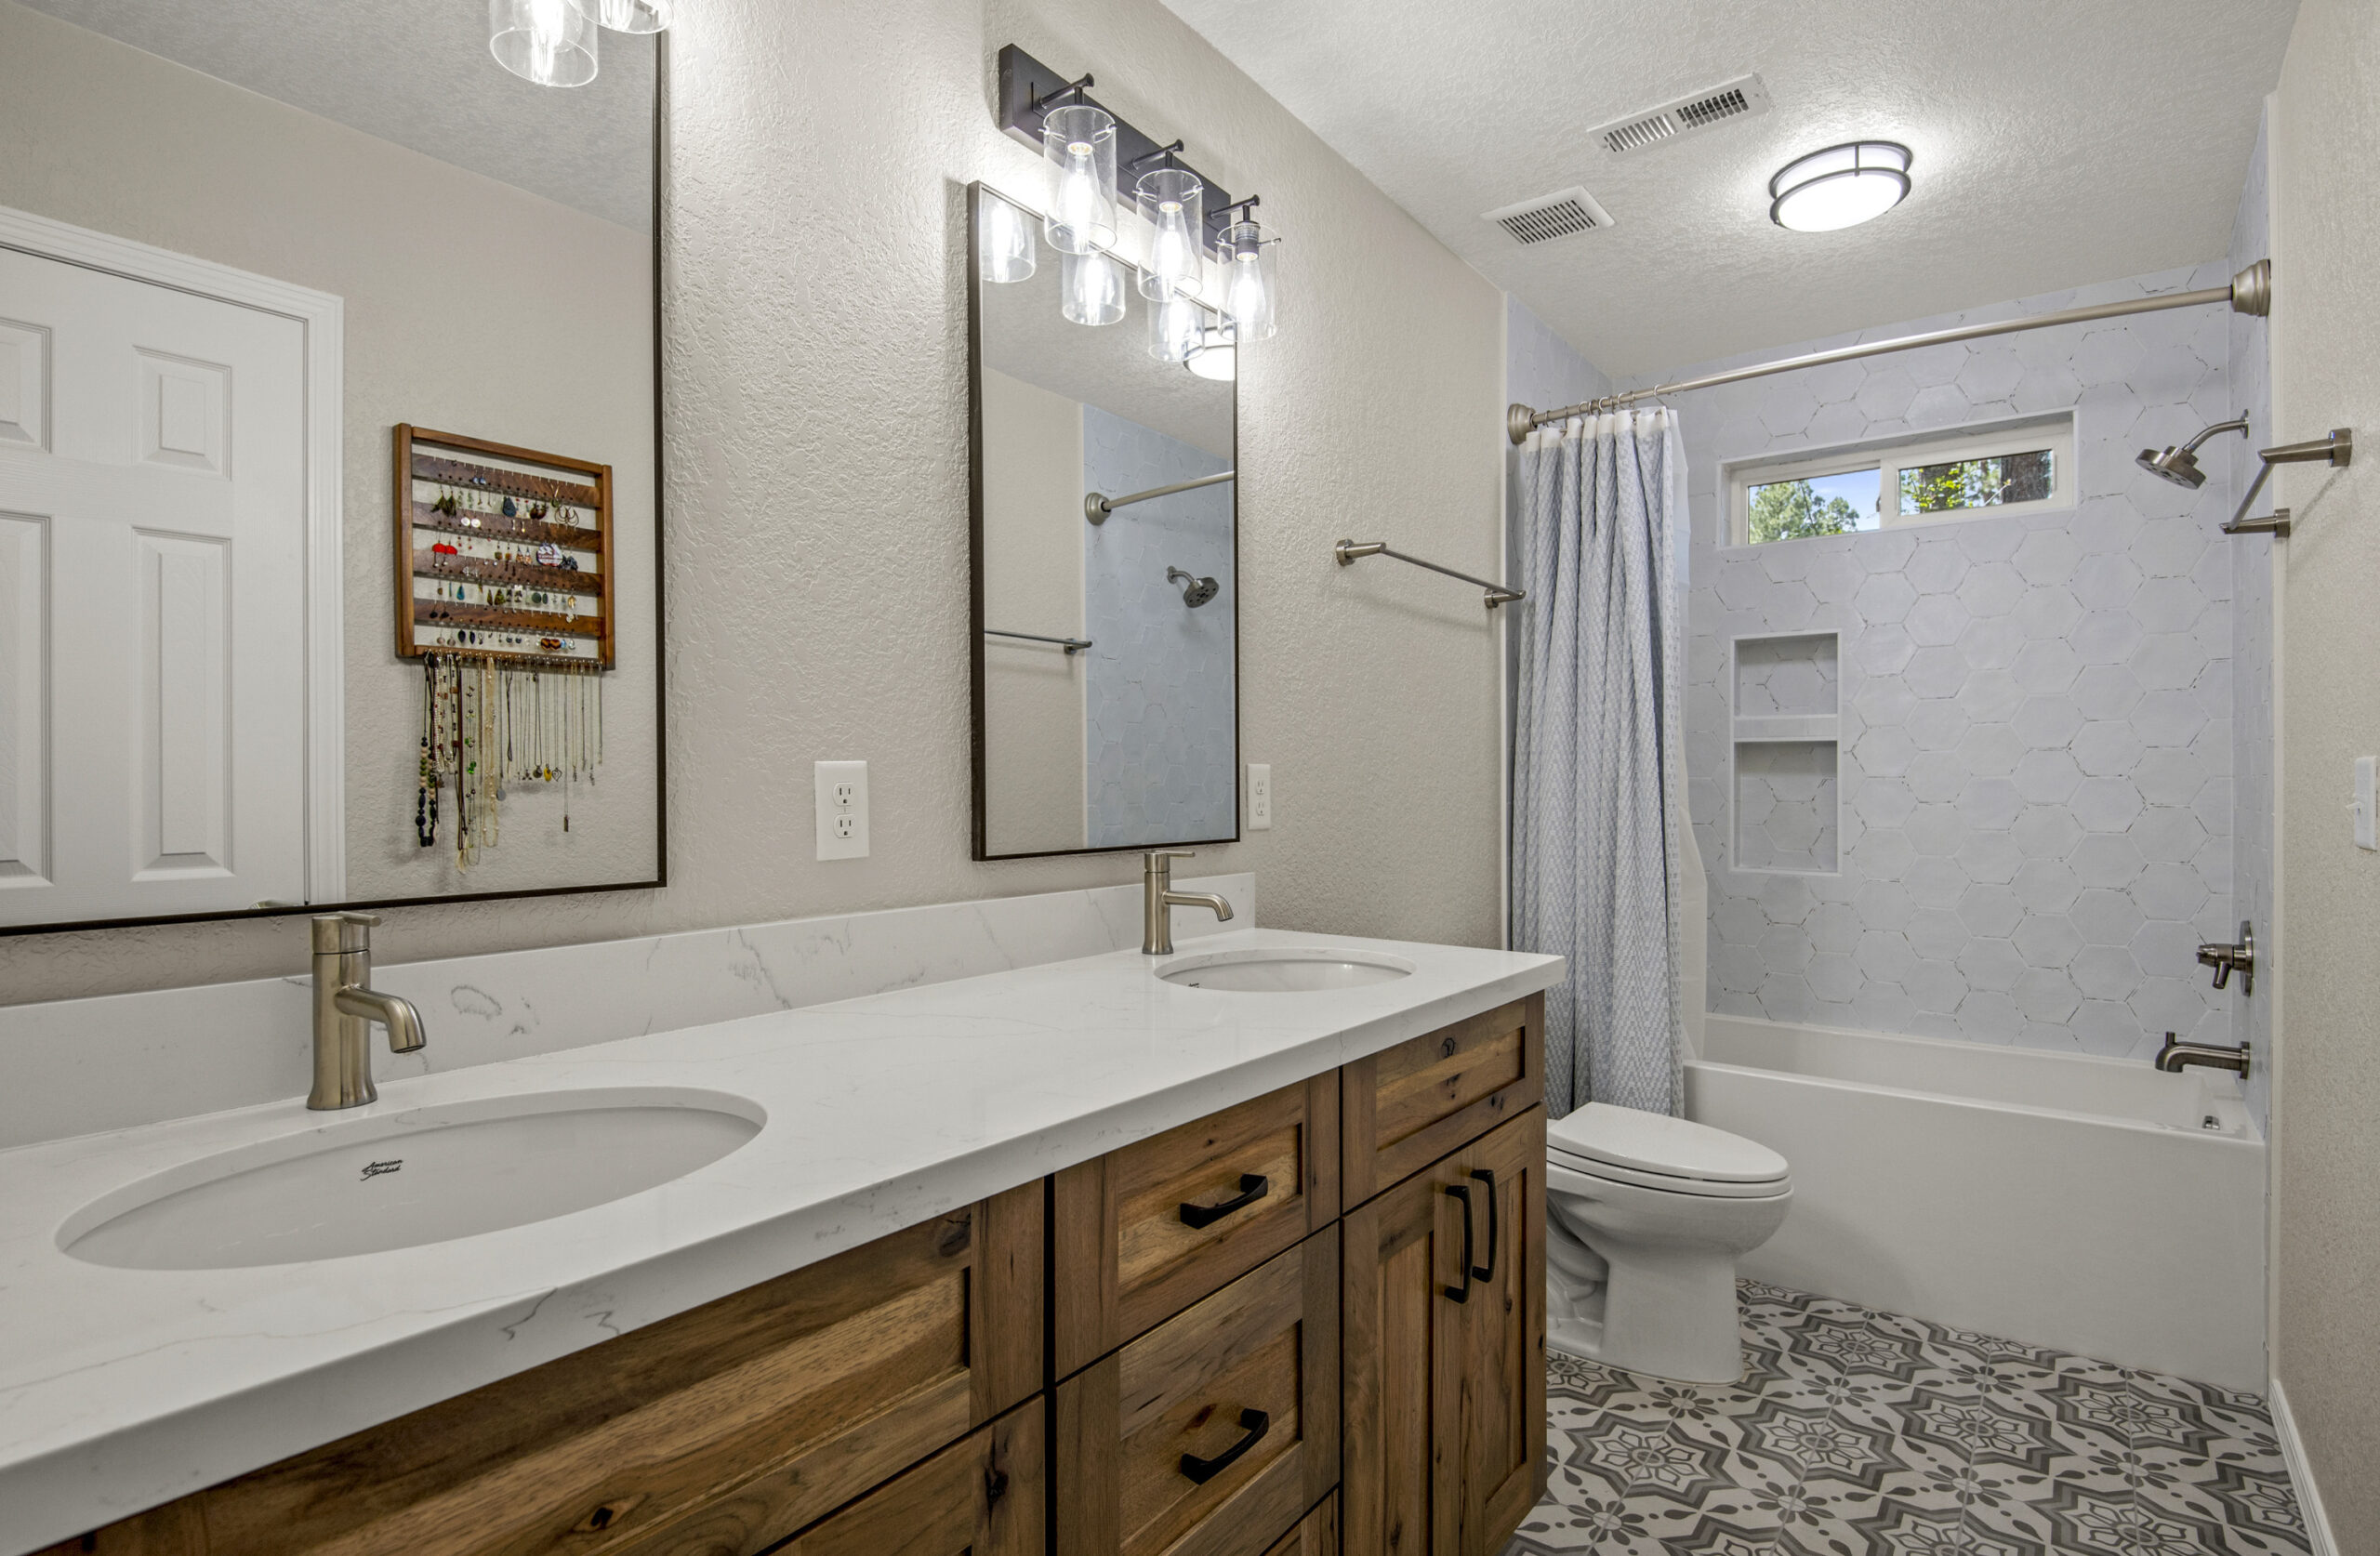 Bathroom Remodel in Small Space